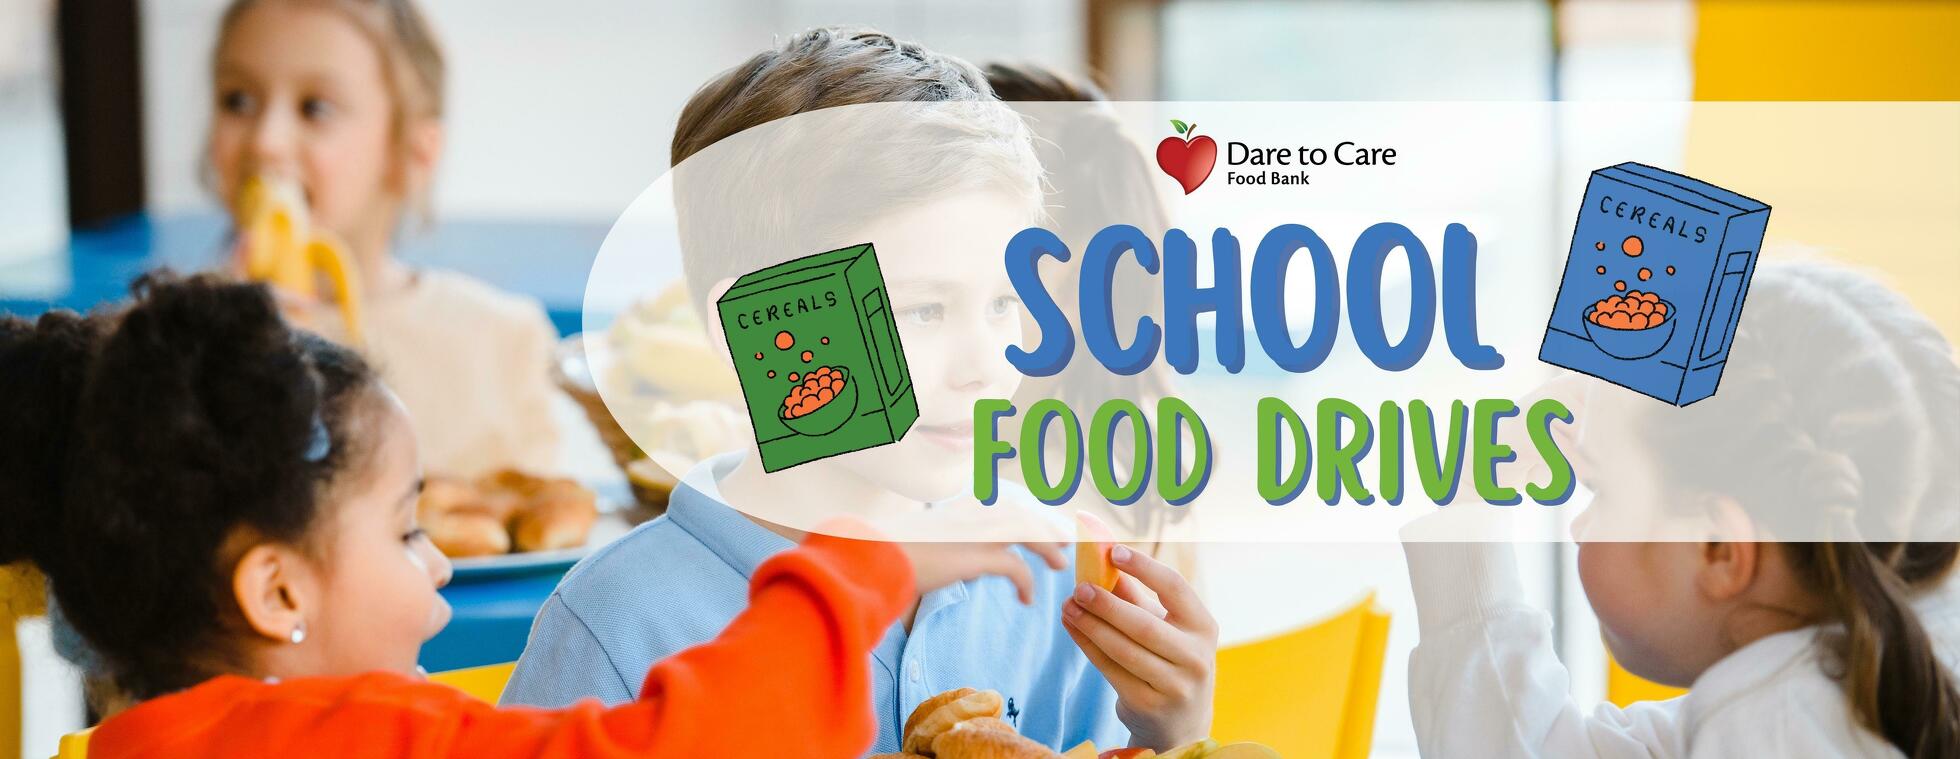 School Food Drives with Dare to Care